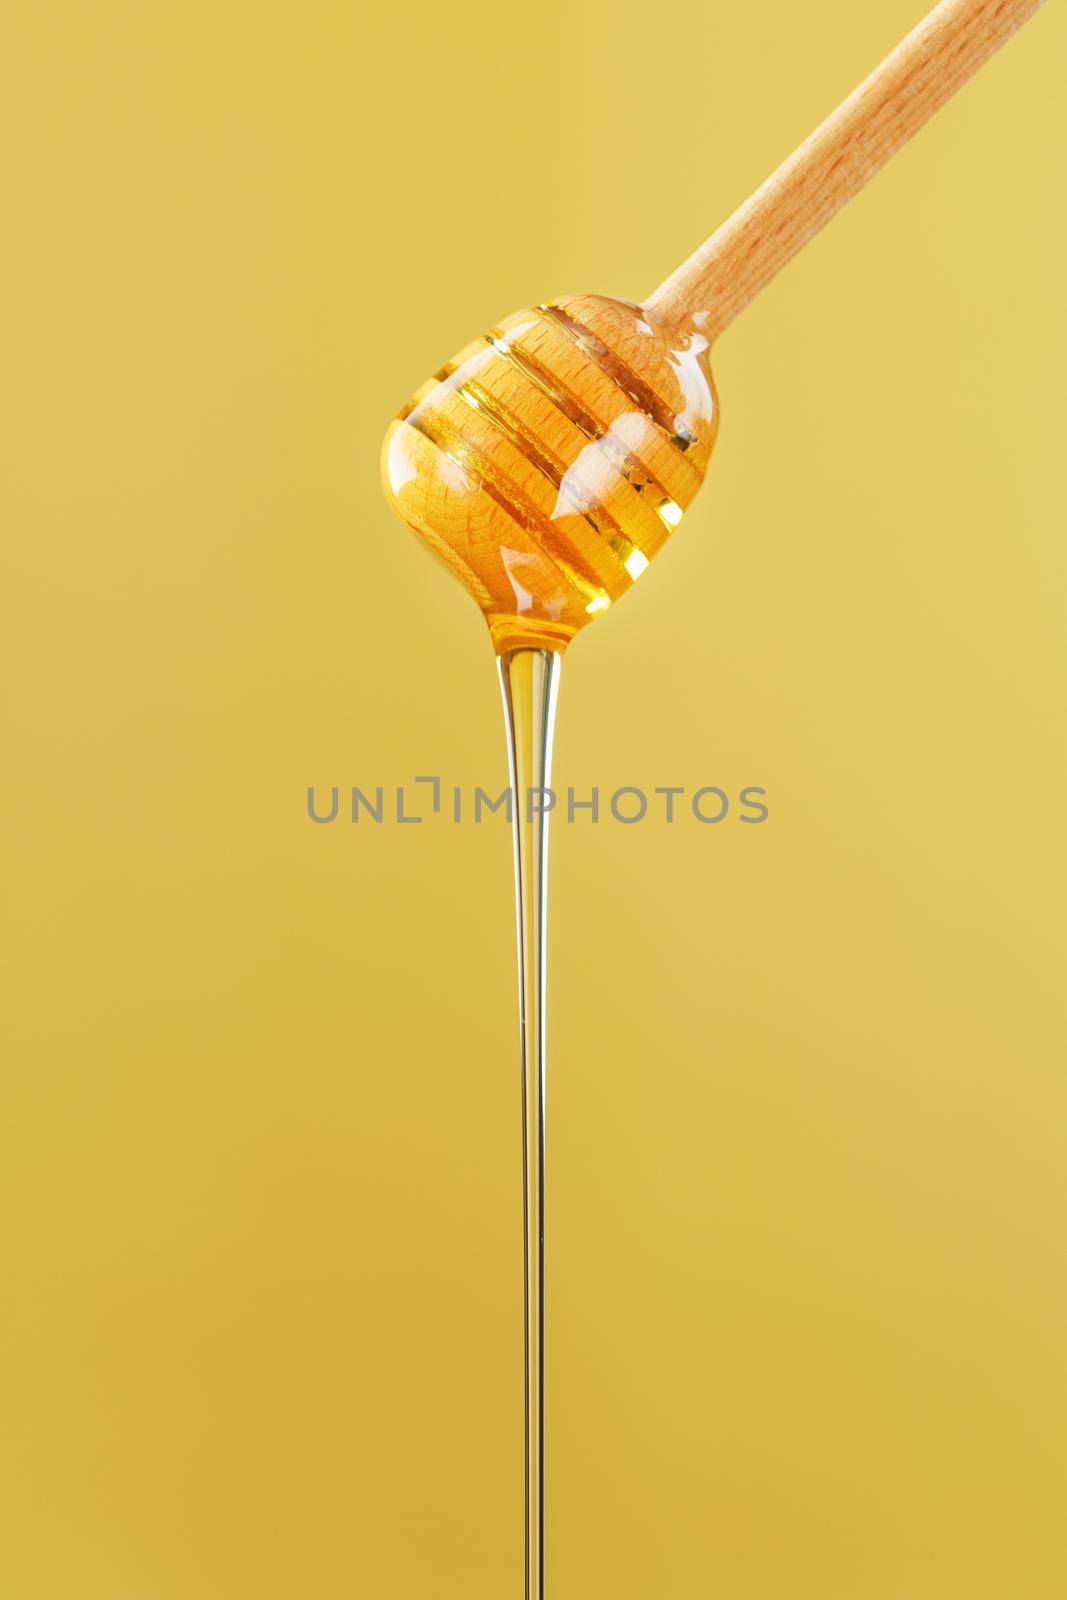 Golden honey trickles from a wooden honey dipper on a yellow background